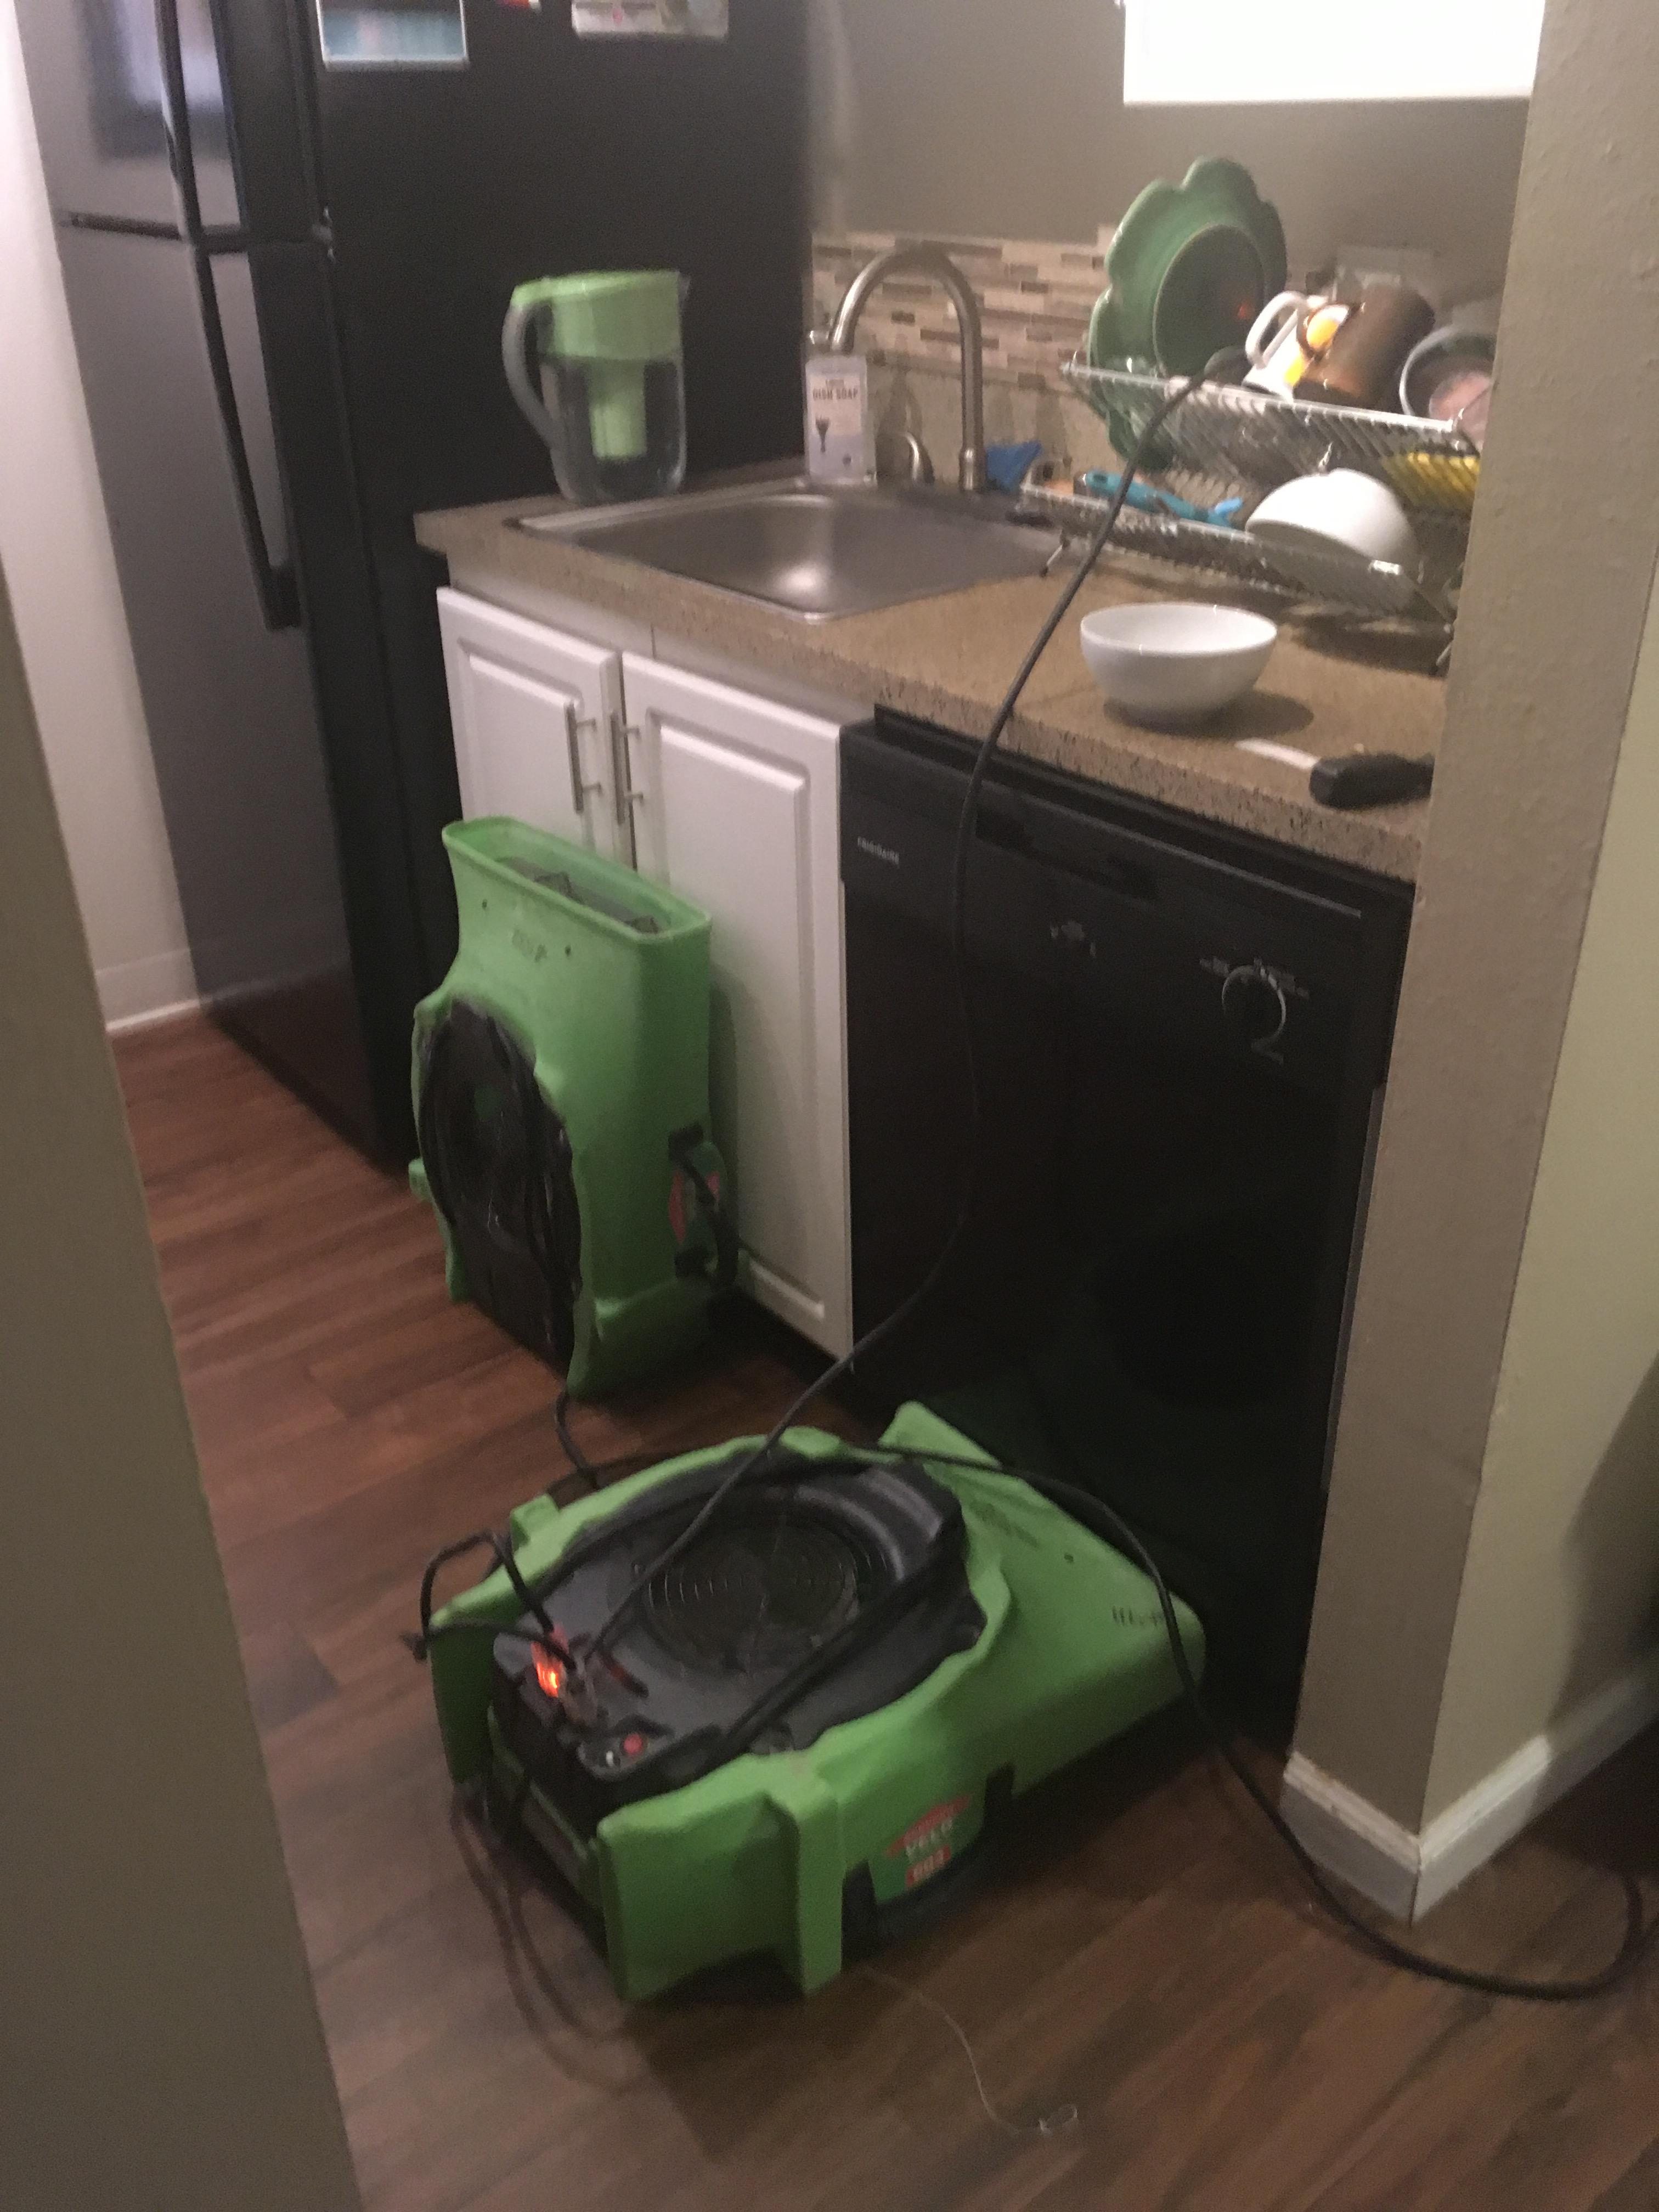 Call SERVPRO of Shoreline/Woodinville for your water damage cleanup and restoration needs!